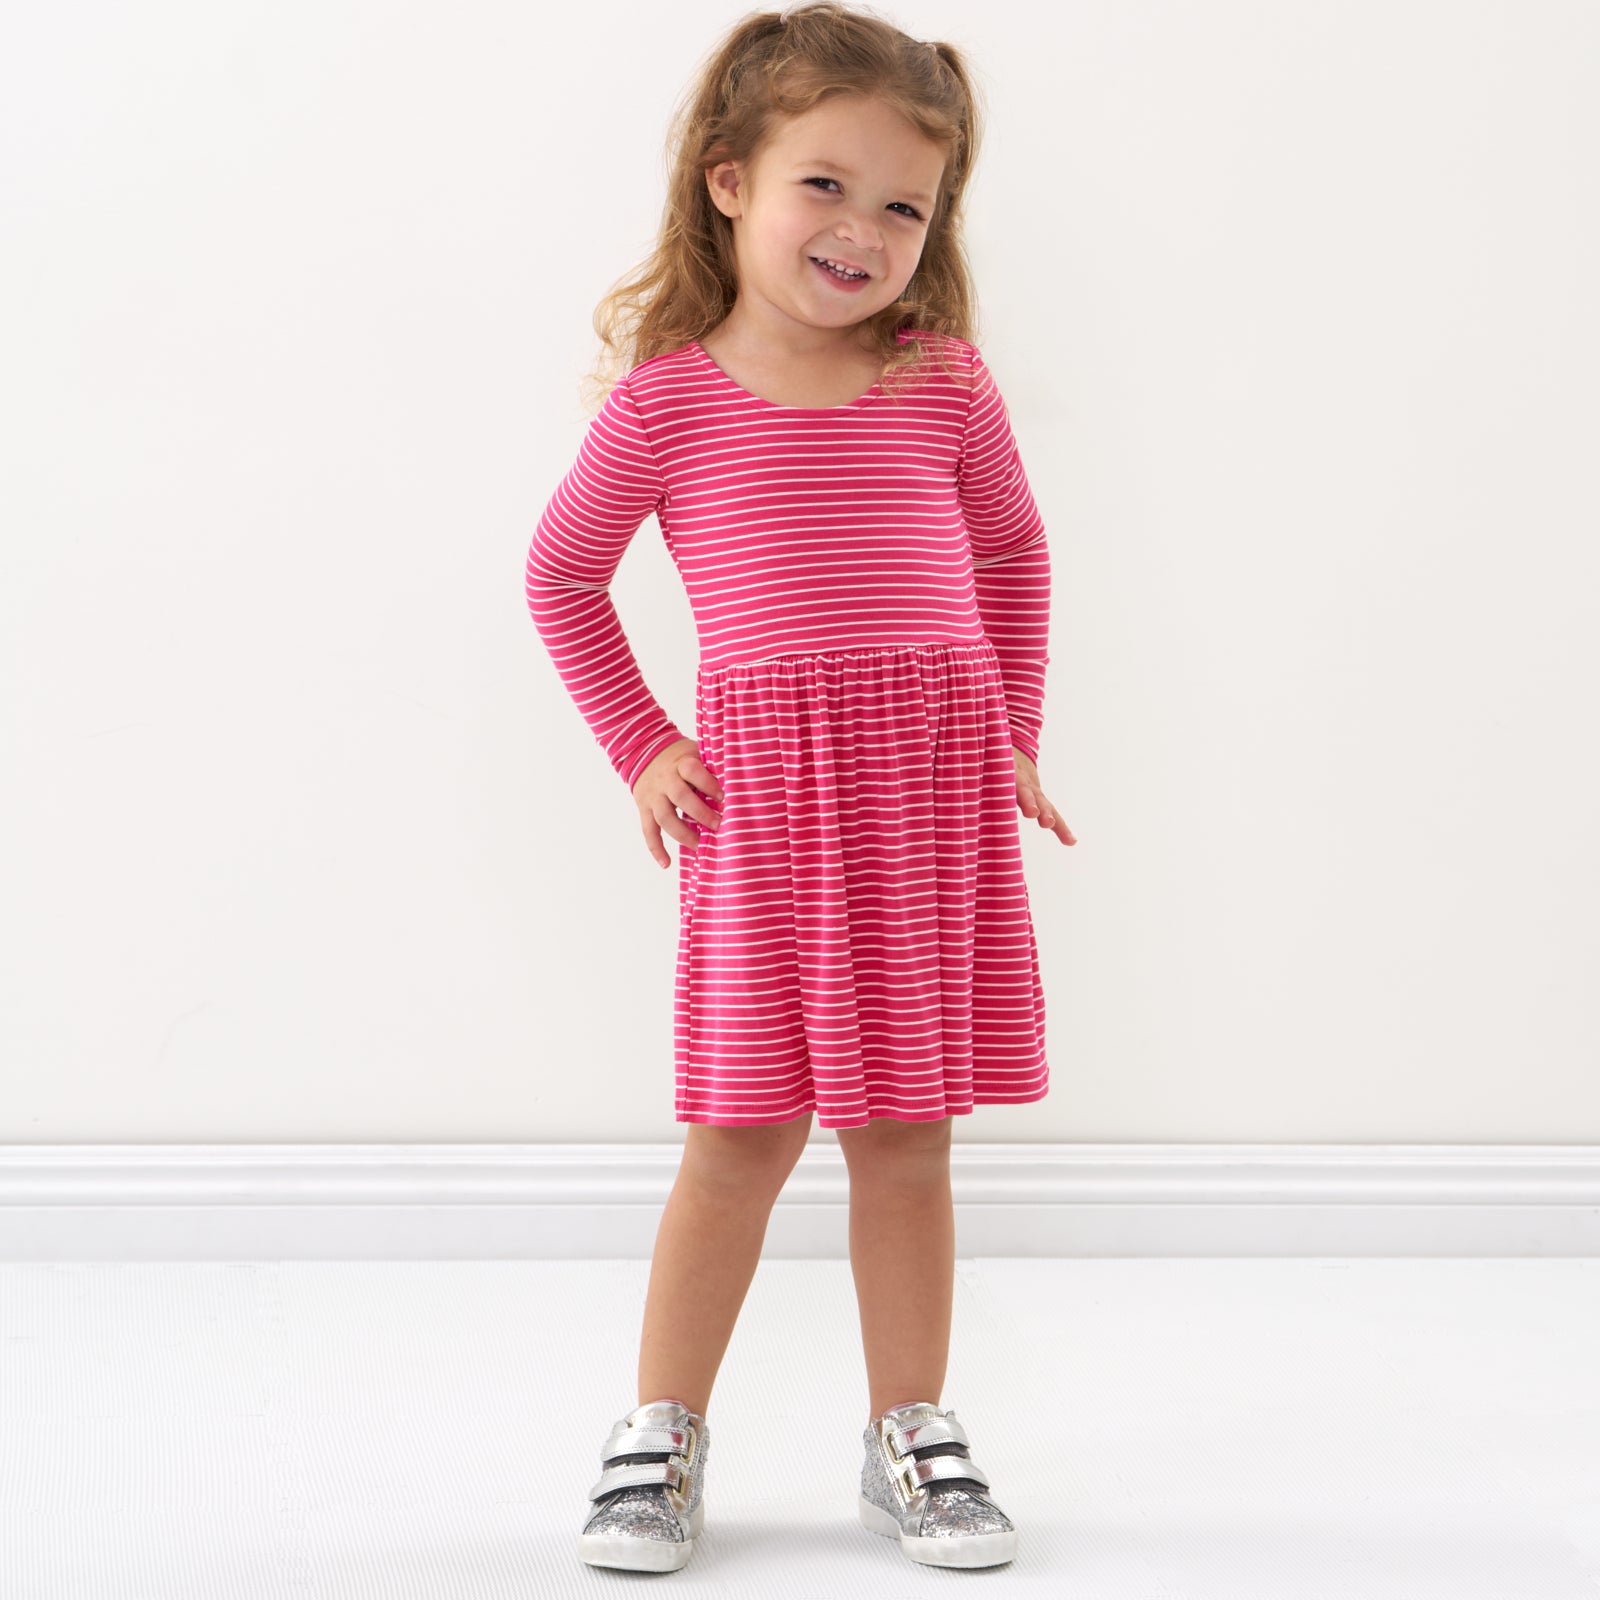 Child with her hands on her hips wearing a Pink Punch Stripes bow back skater dress